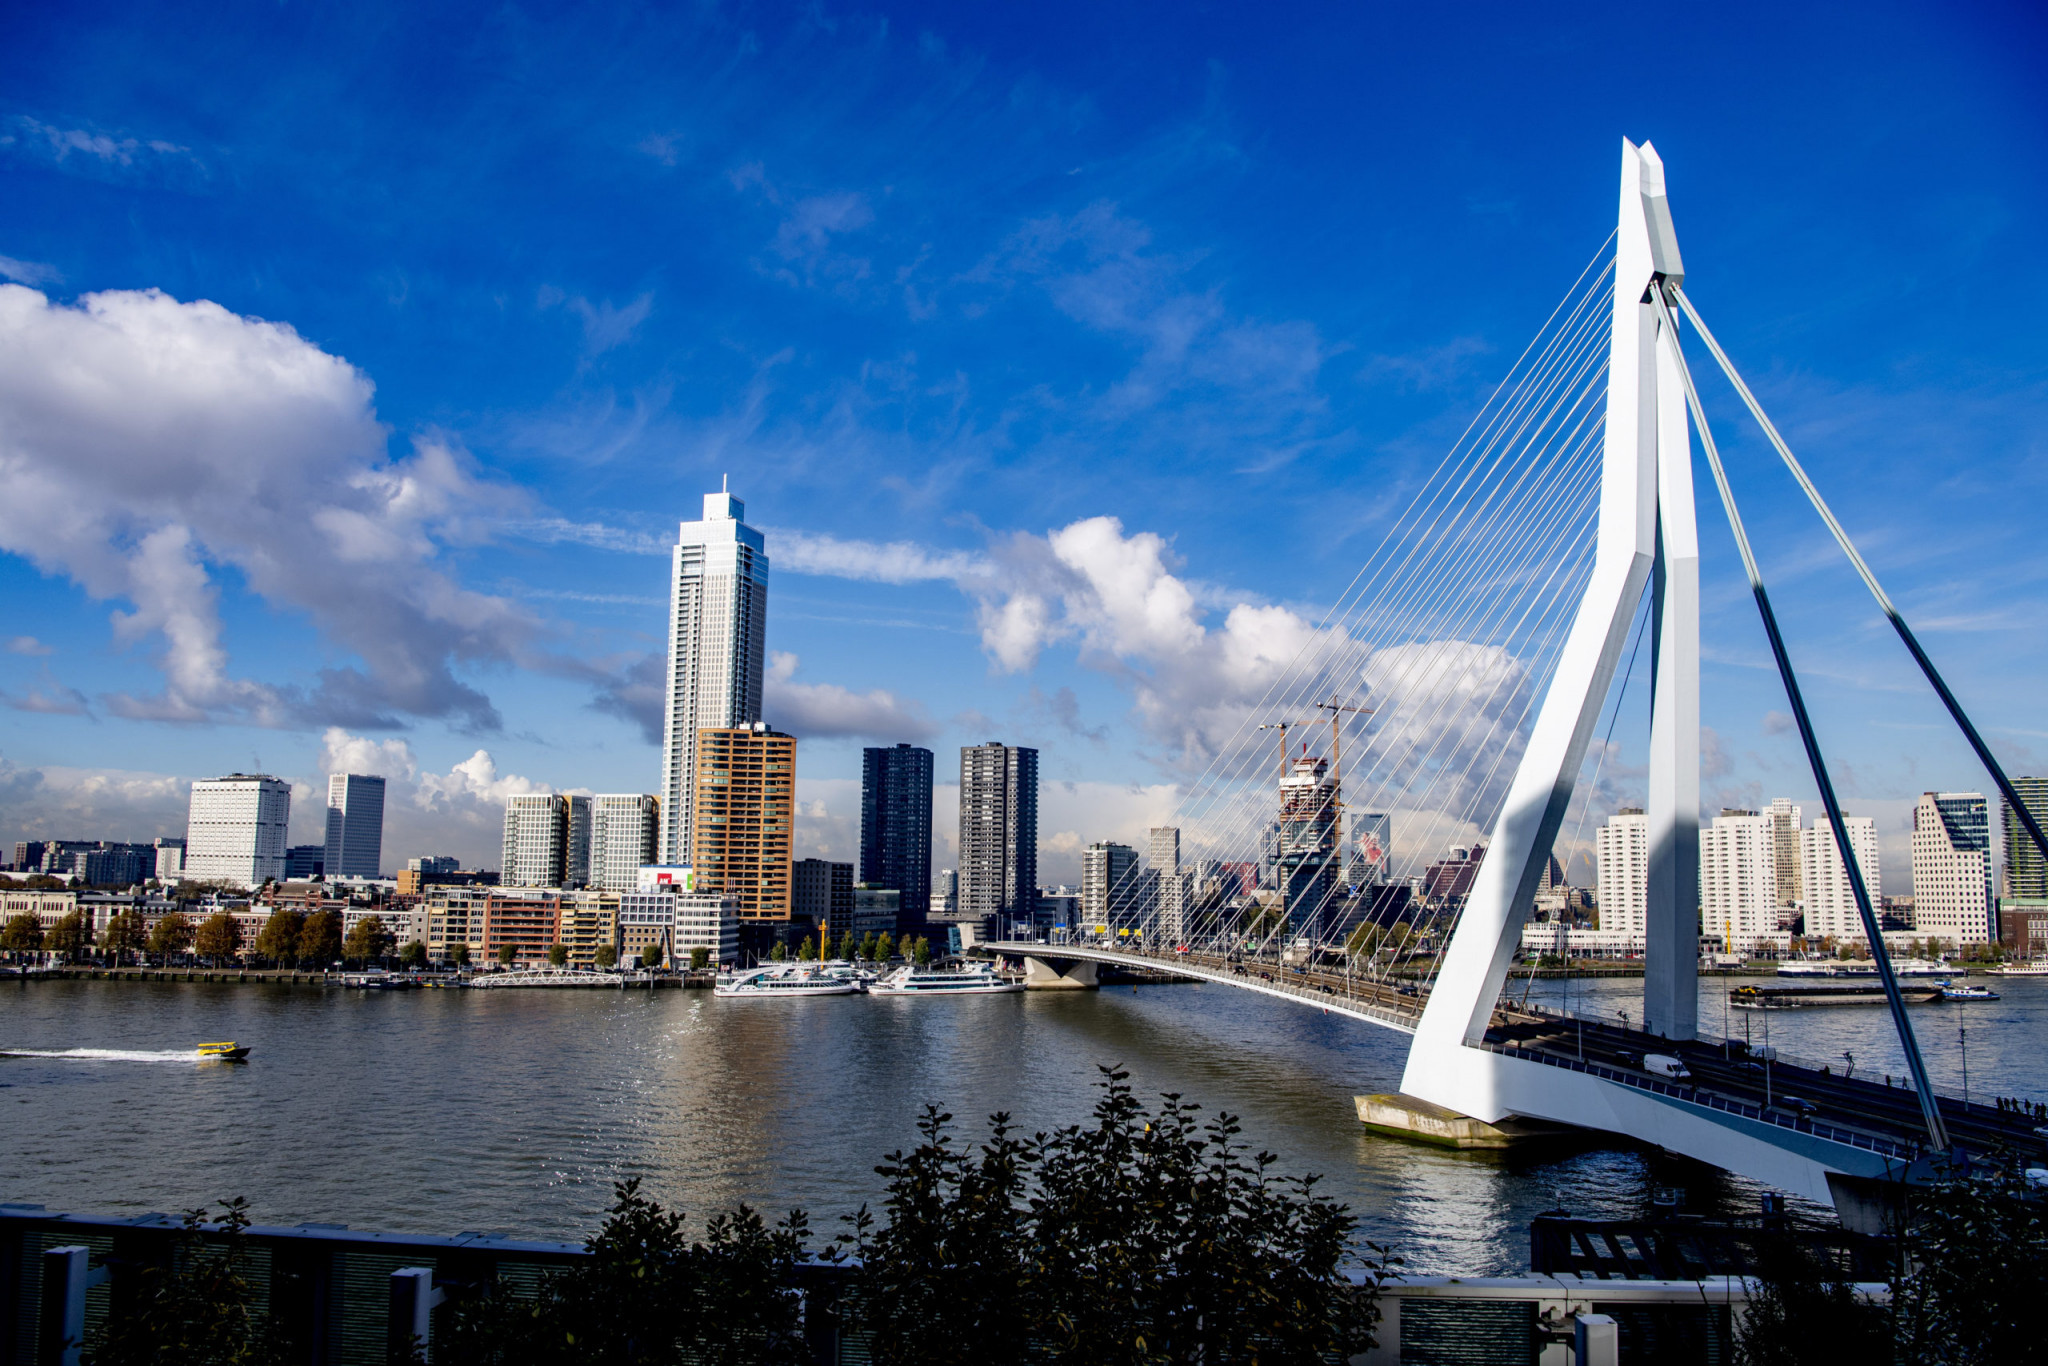 Rotterdam is due to host the first edition of the European Para Championships from August 8 to 20 ©EPC